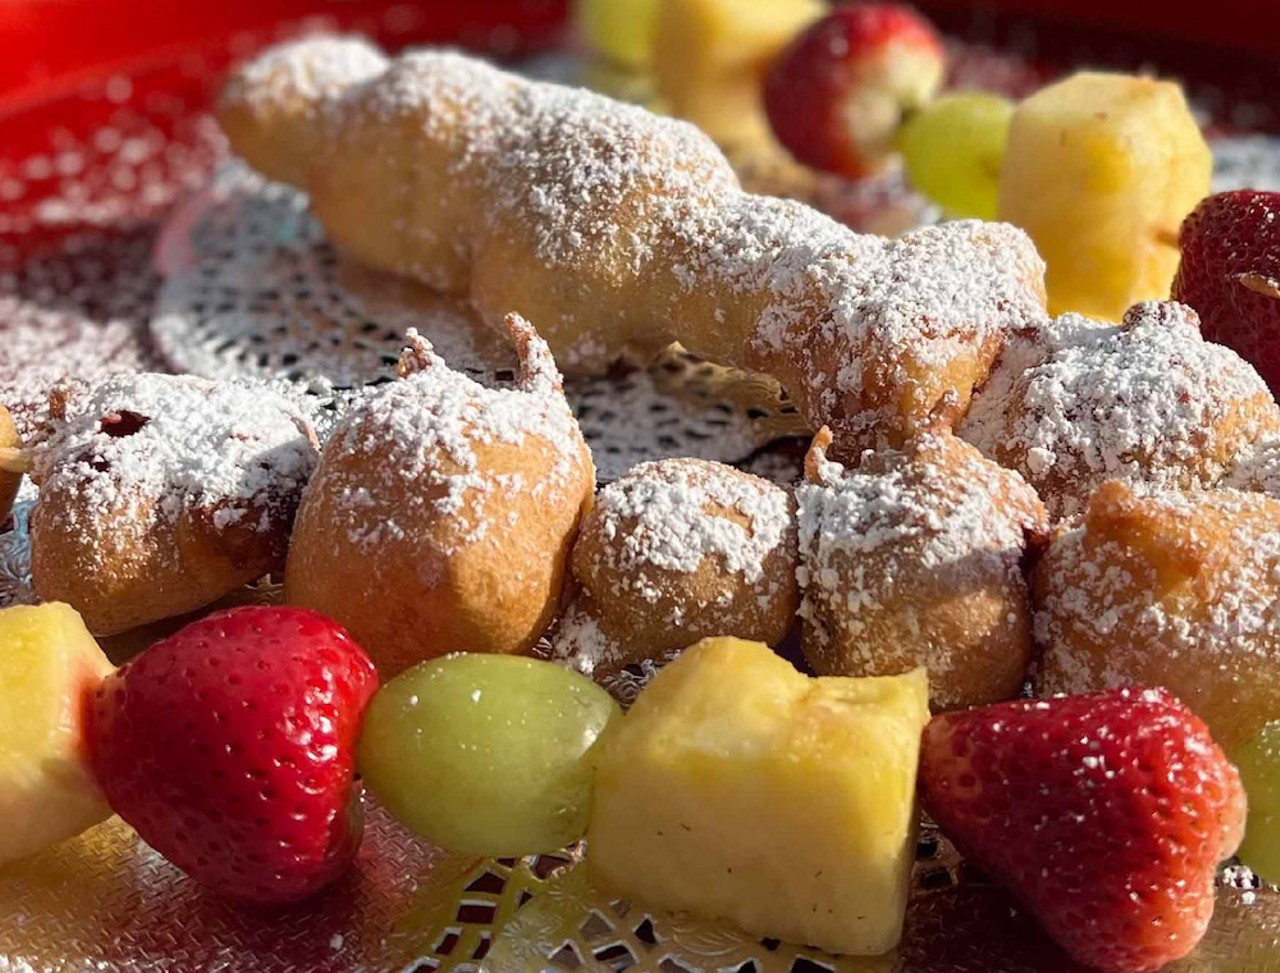 Deep-Fried Fruit Kabobs            
"Dipped in their secret batter and sprinkled with powdered sugar."                       
Where to find it: Cinnamon City